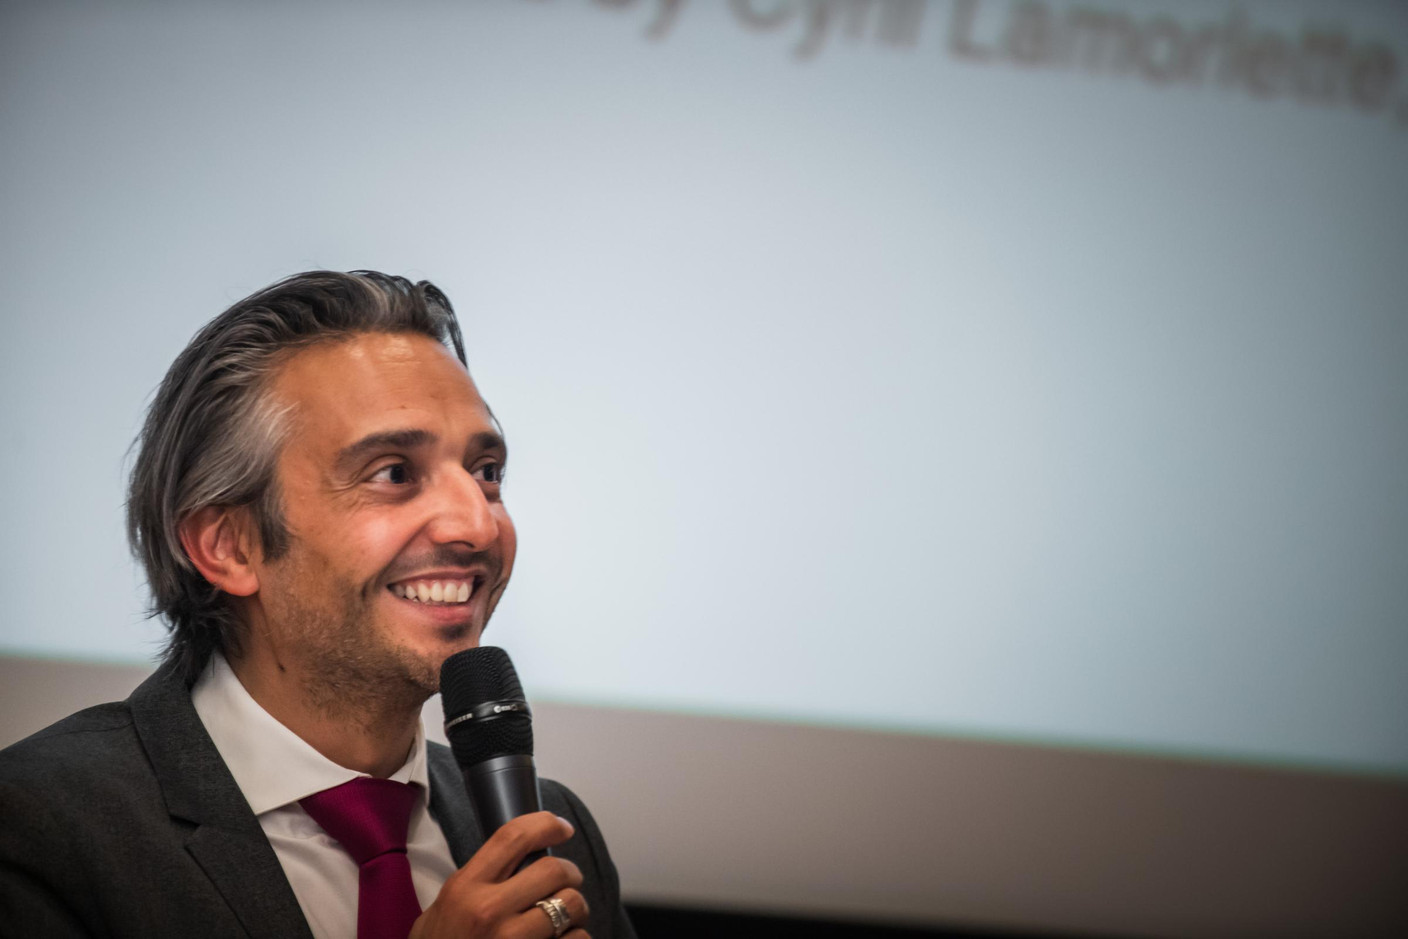 Cyril Lamorlette (PwC Luxembourg) (Photo: Nader Ghavami)